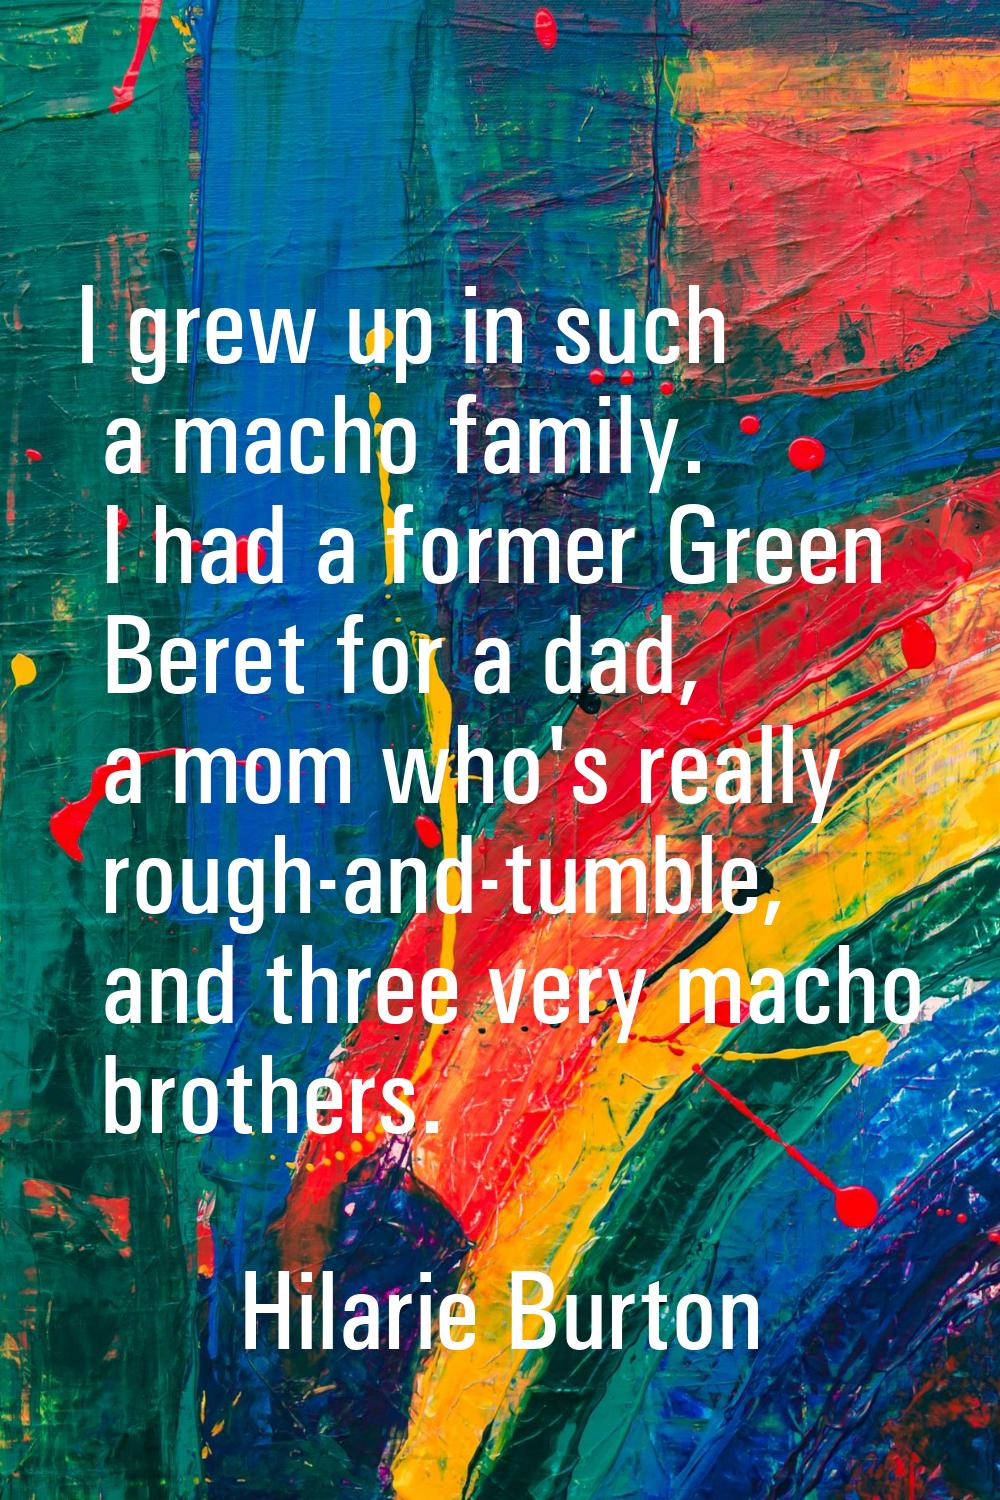 I grew up in such a macho family. I had a former Green Beret for a dad, a mom who's really rough-an